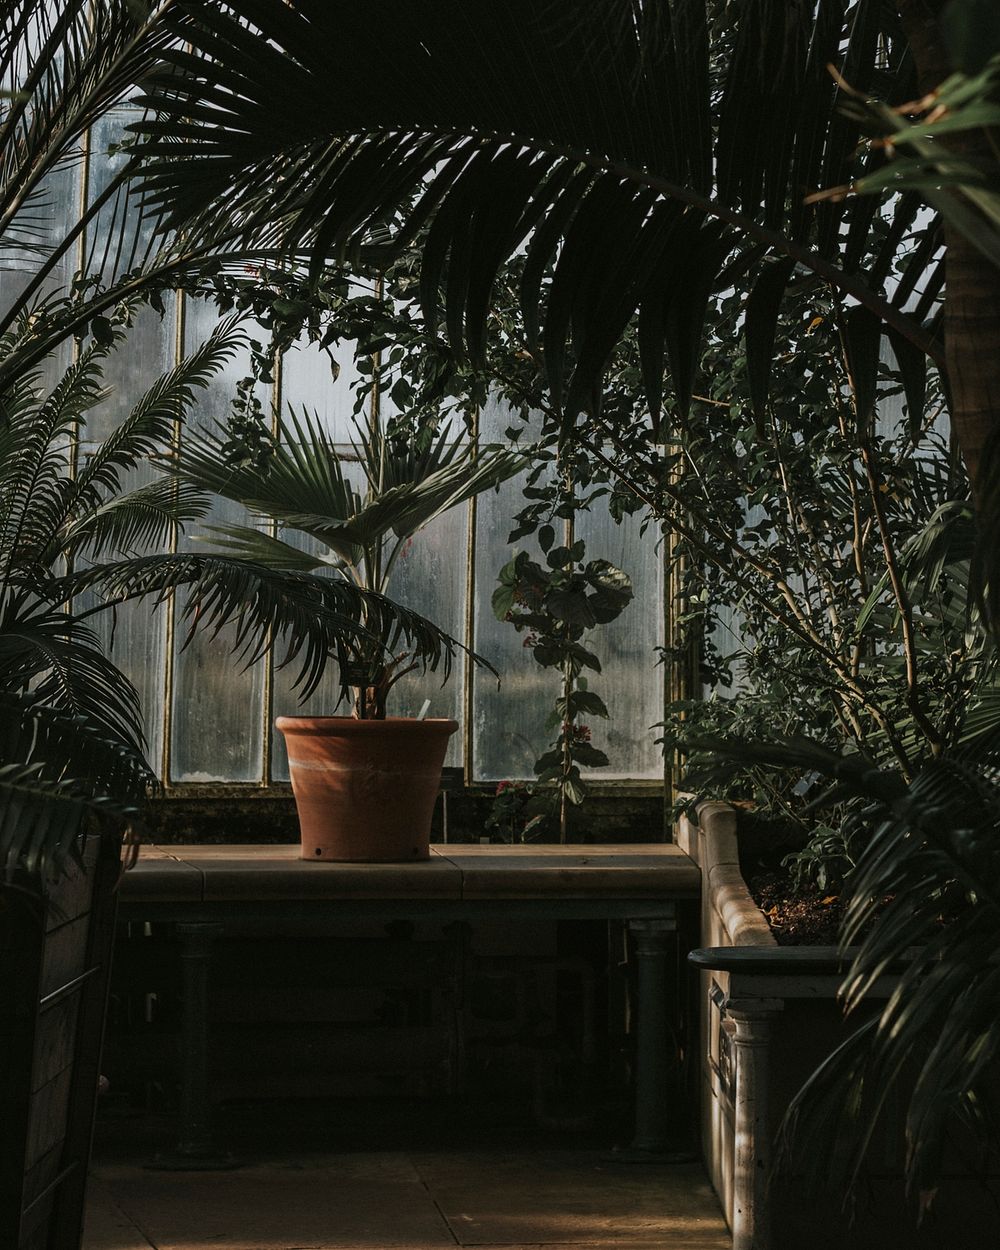 Plants in a greenhouse. Original public domain image from Wikimedia Commons